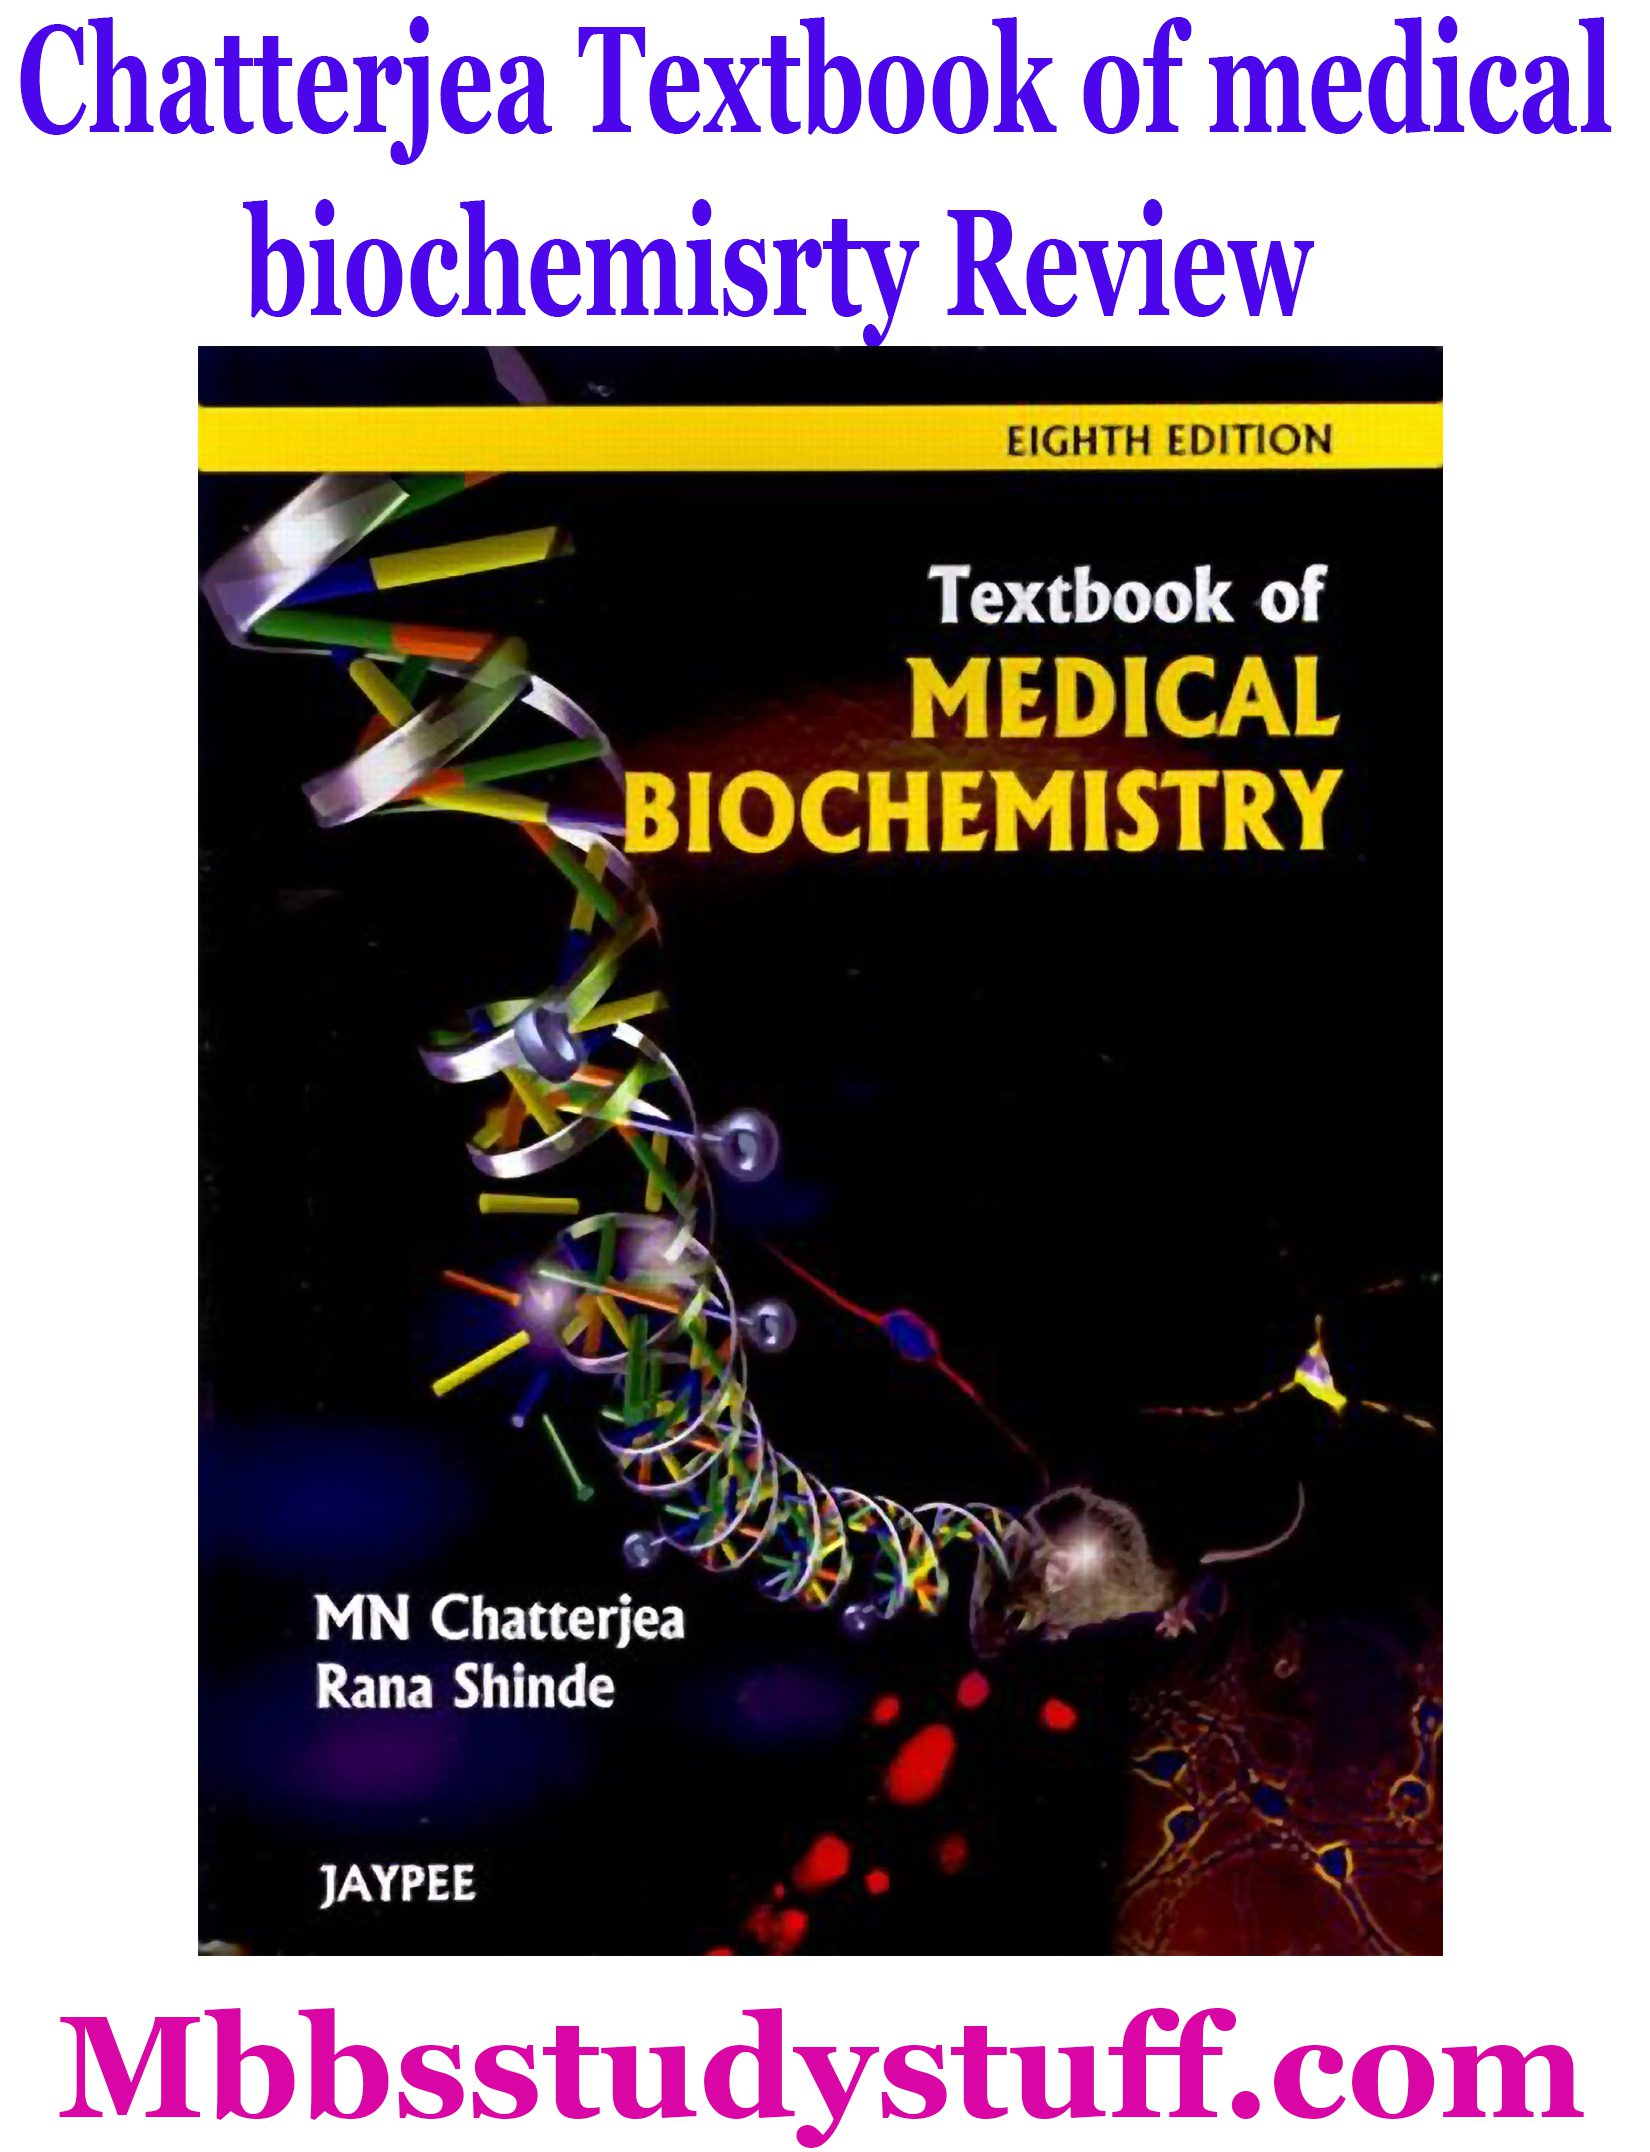 Chatterjea Textbook of Medical Biochemistry PDF 8th Edition Download Free